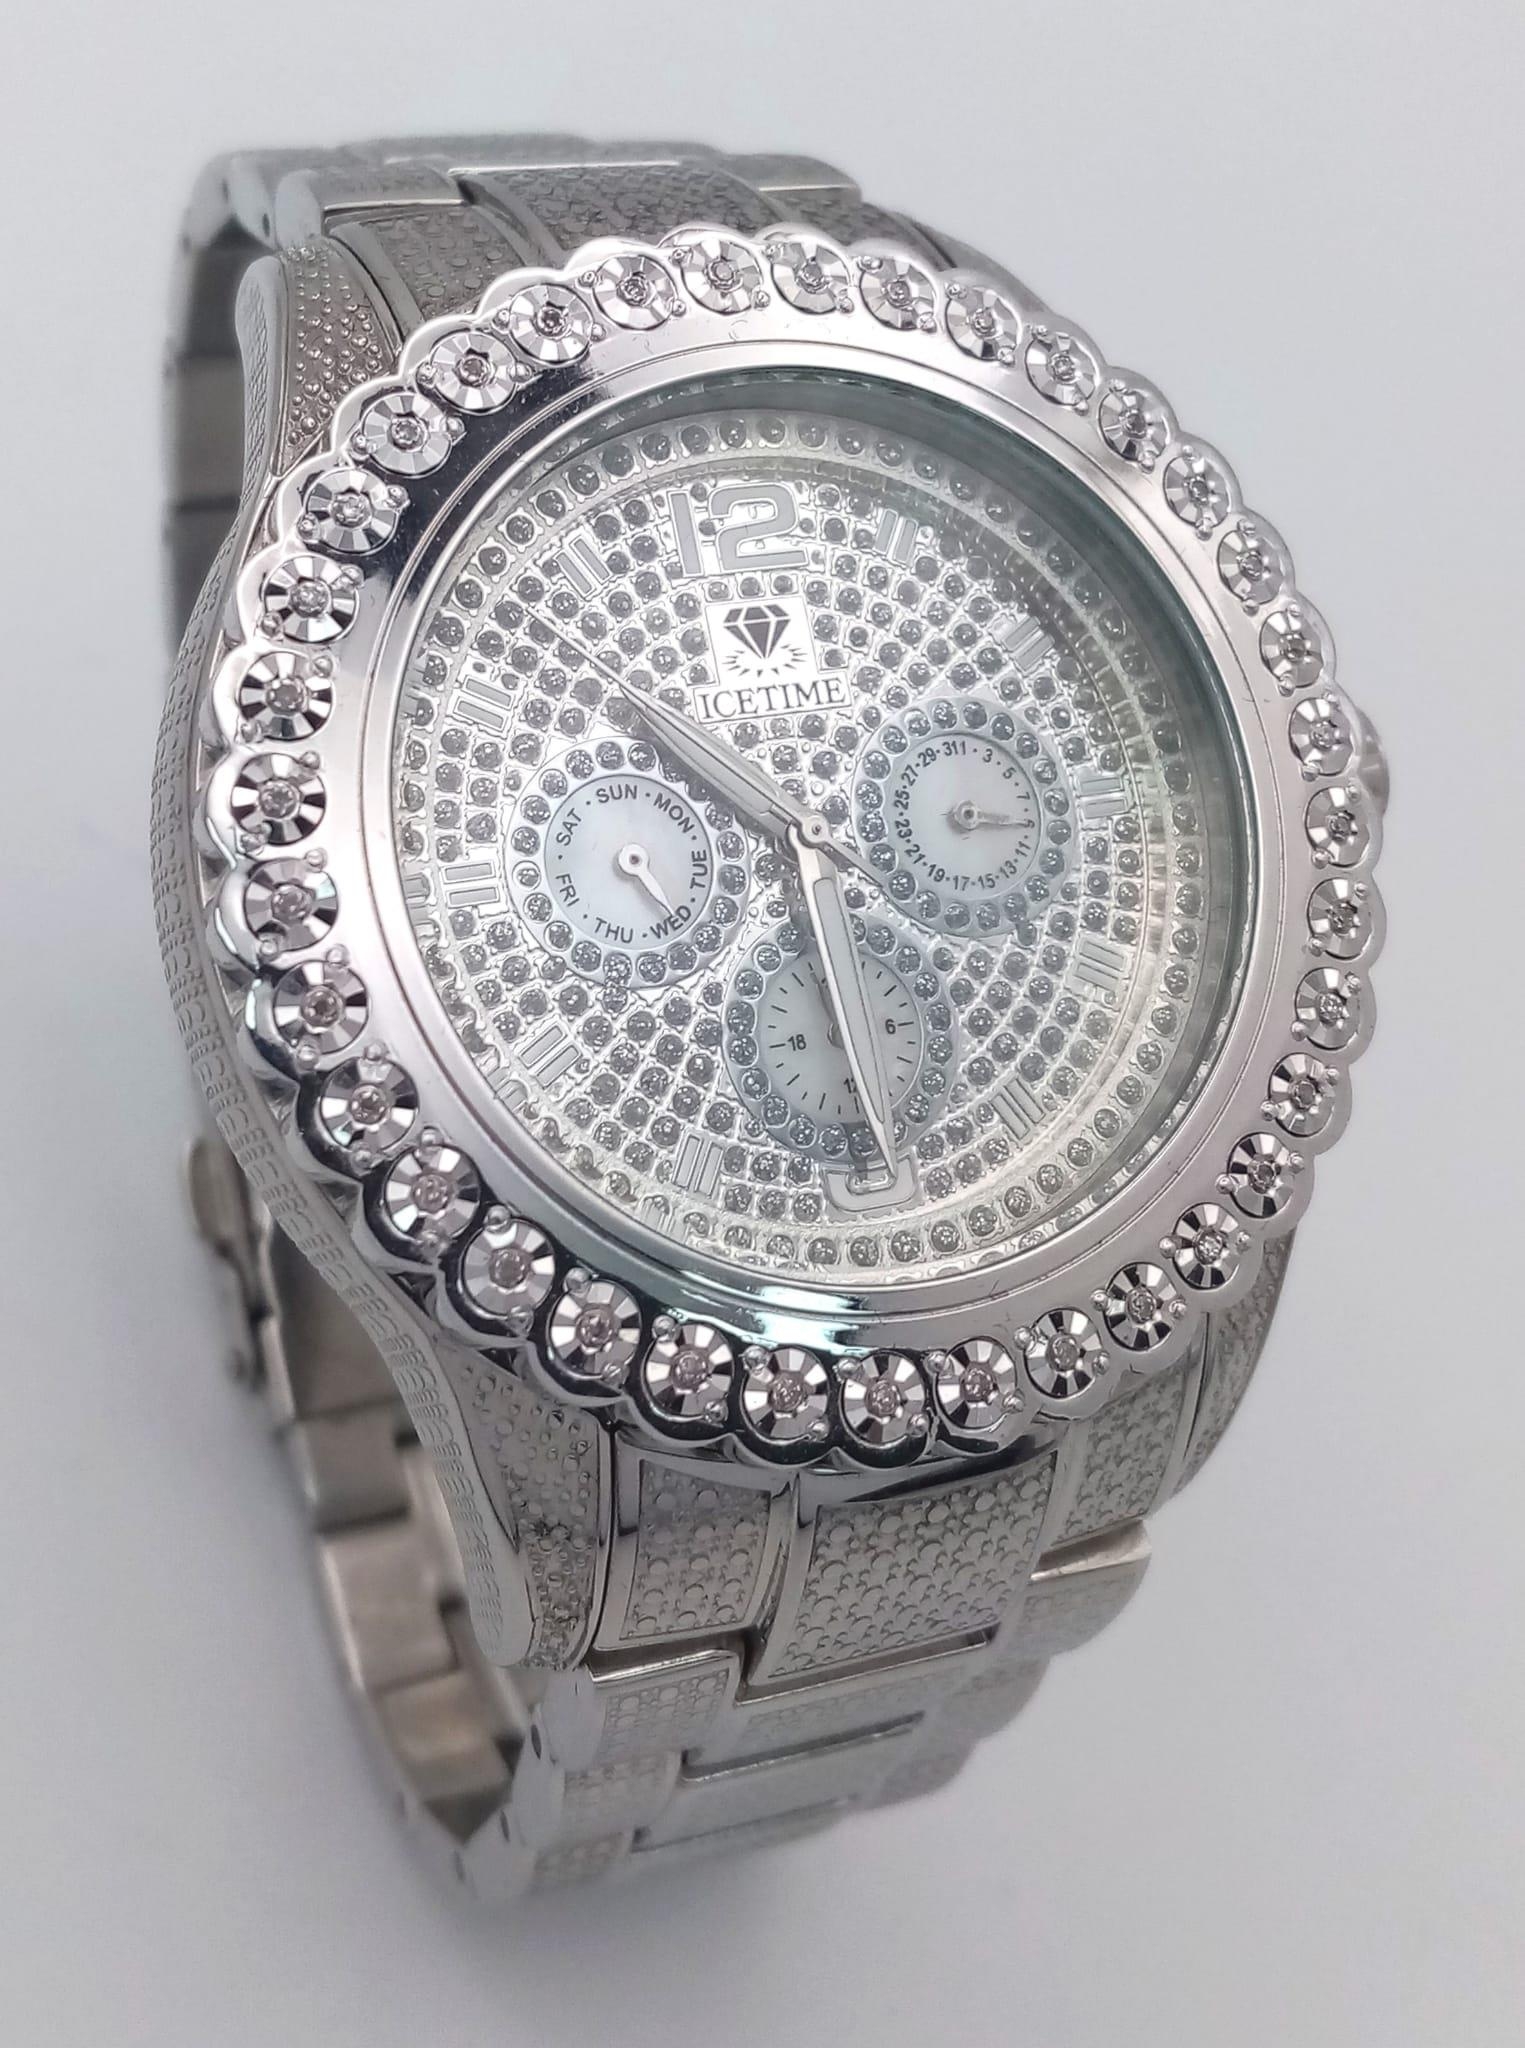 An Icetime Diamond Quartz Gents Watch. Stainless steel bracelet and case - 47mm. White stone - Image 3 of 8